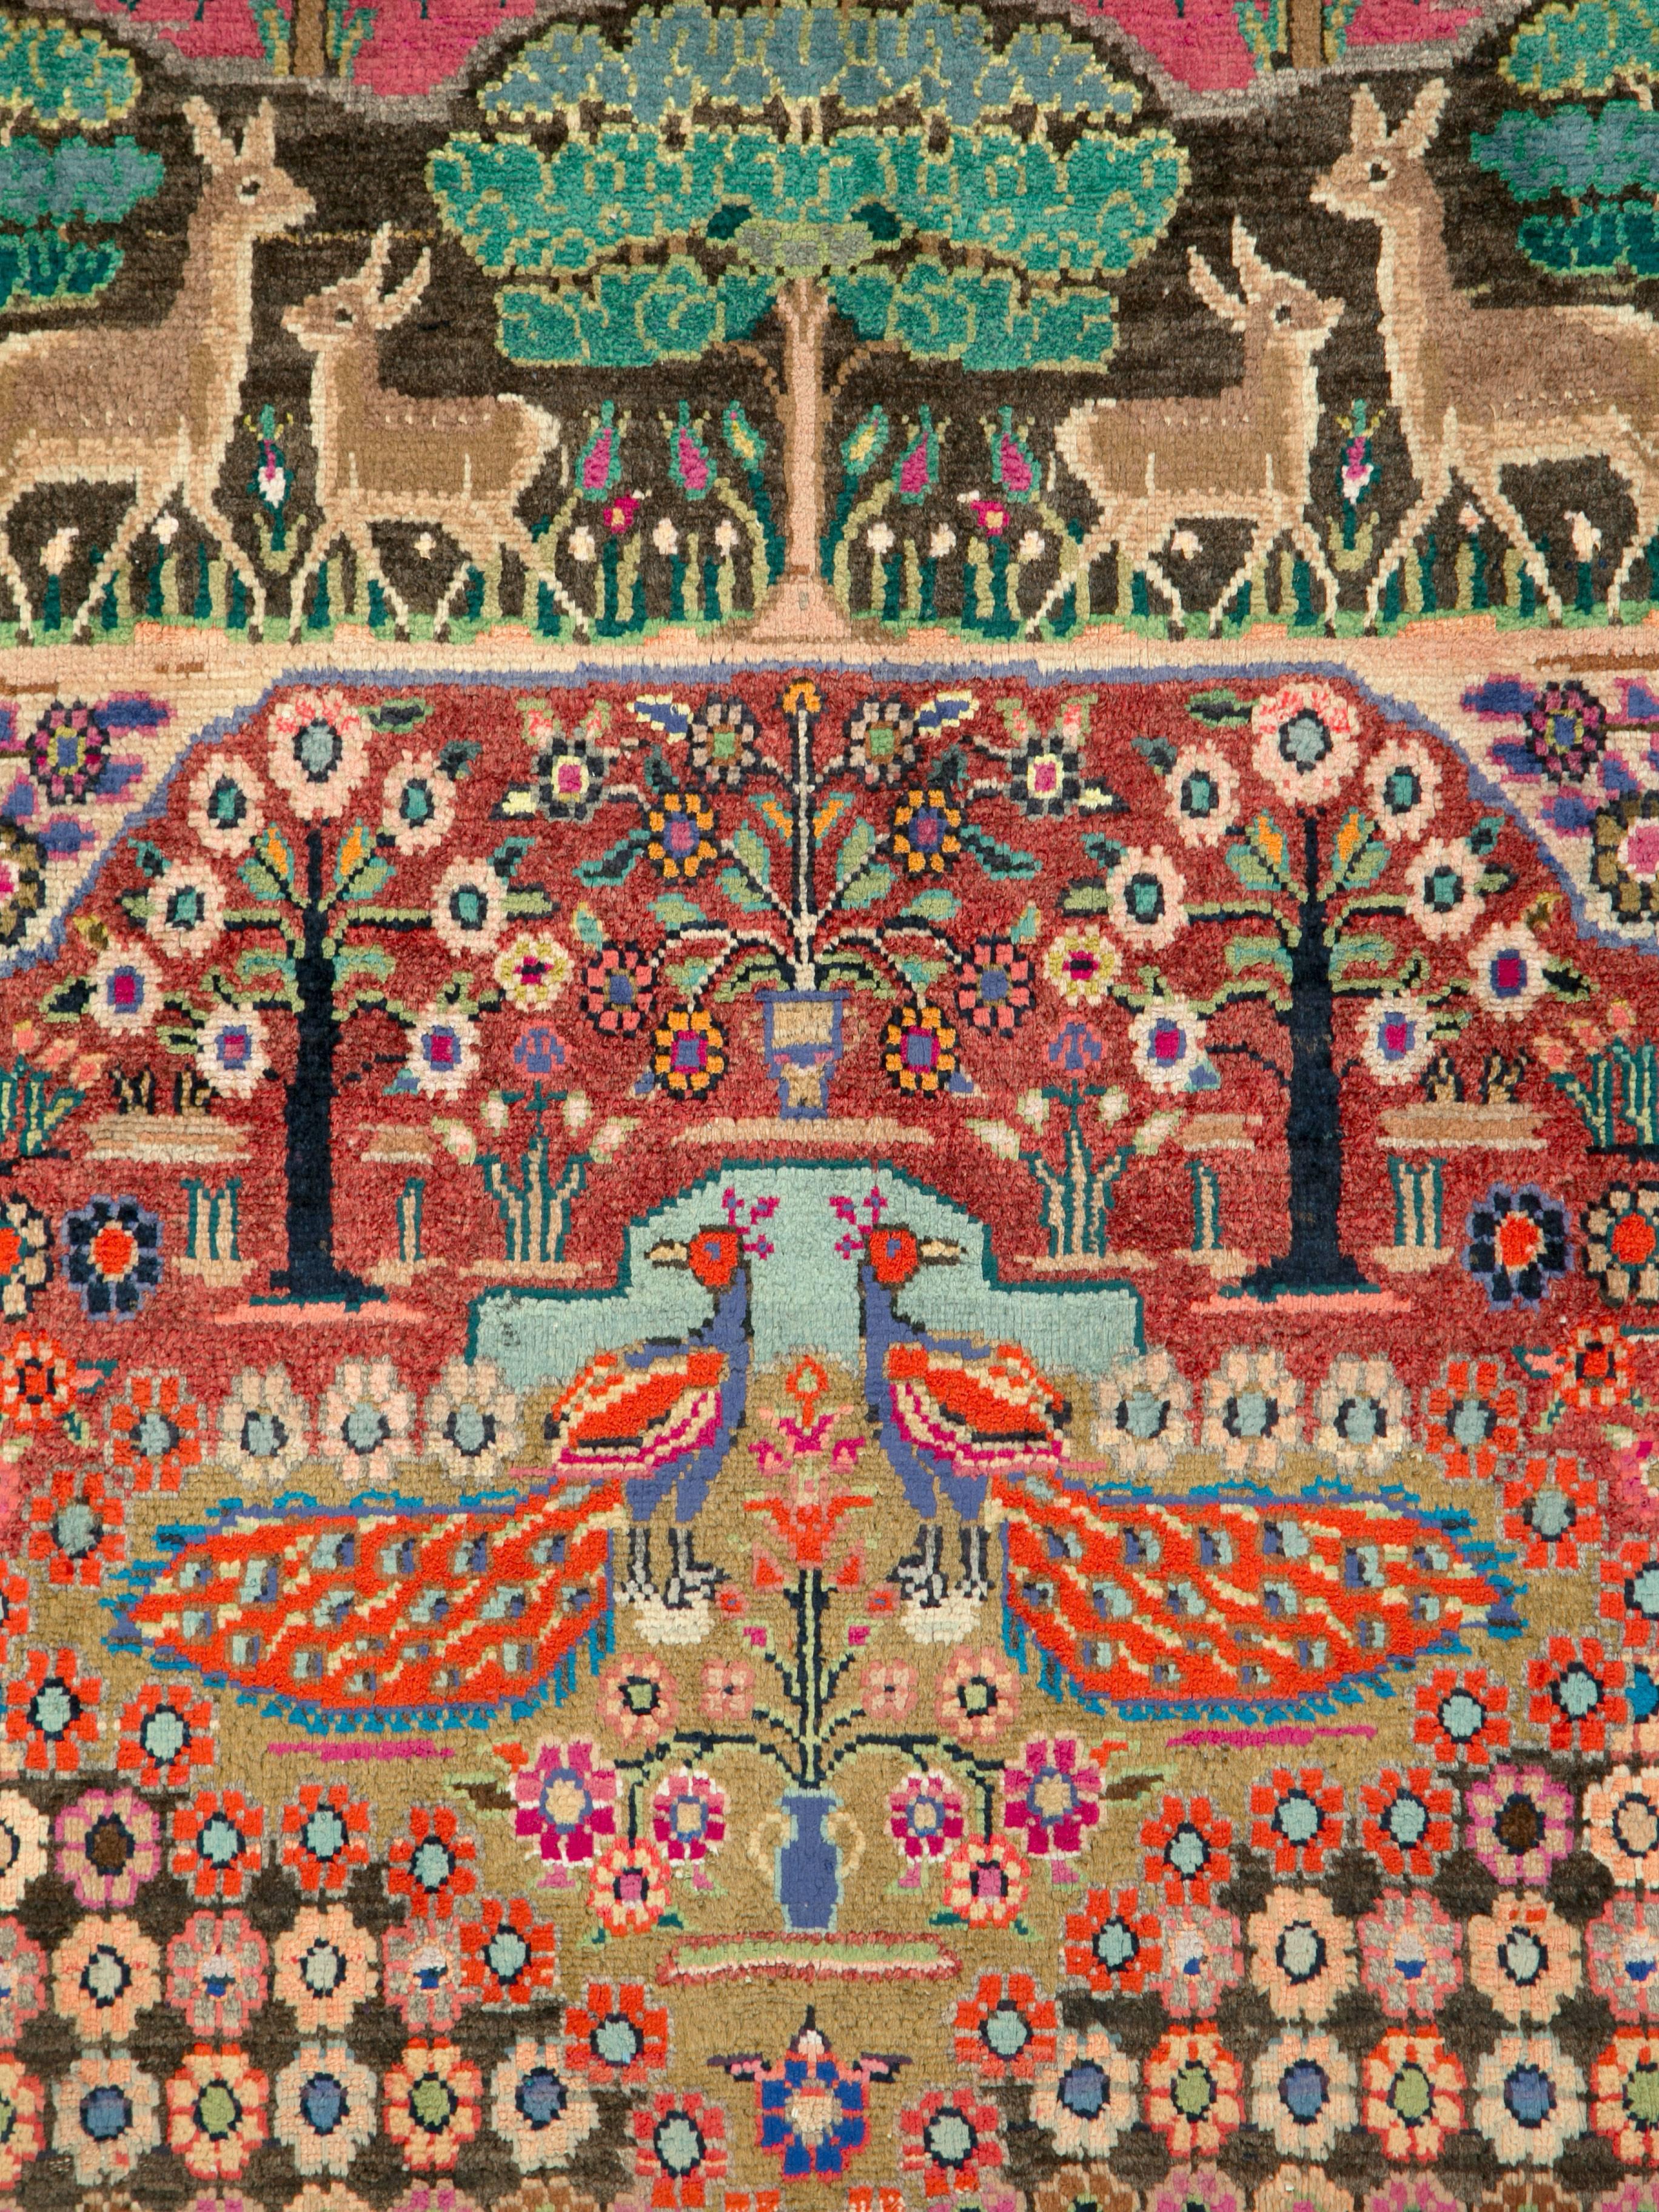 A vintage Persian Hamadan pictorial rug from the mid-20th century.